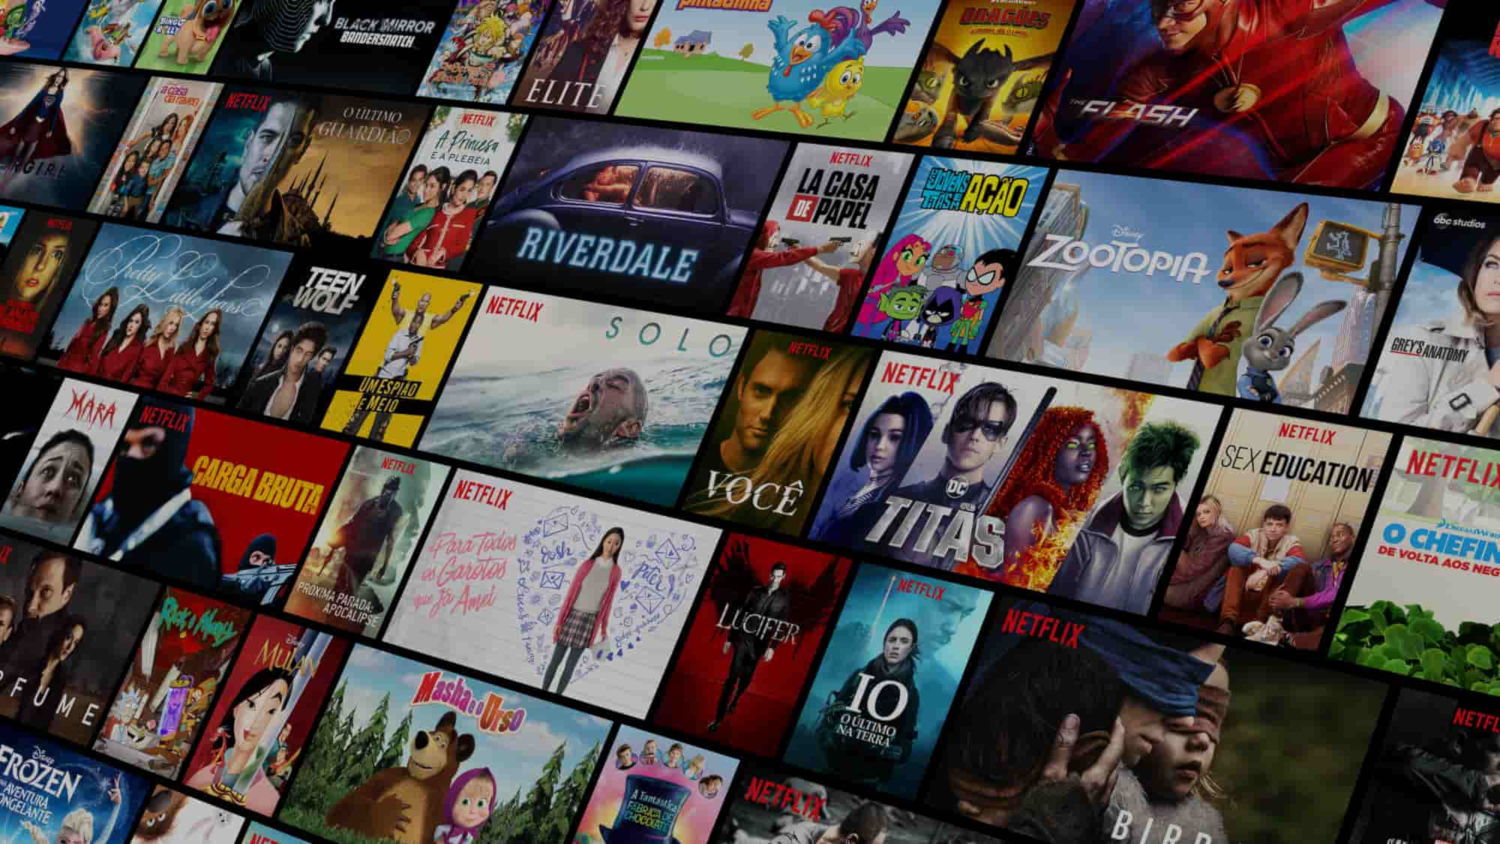 Pelis123 - Your Go-To Destination For Free Online Movies